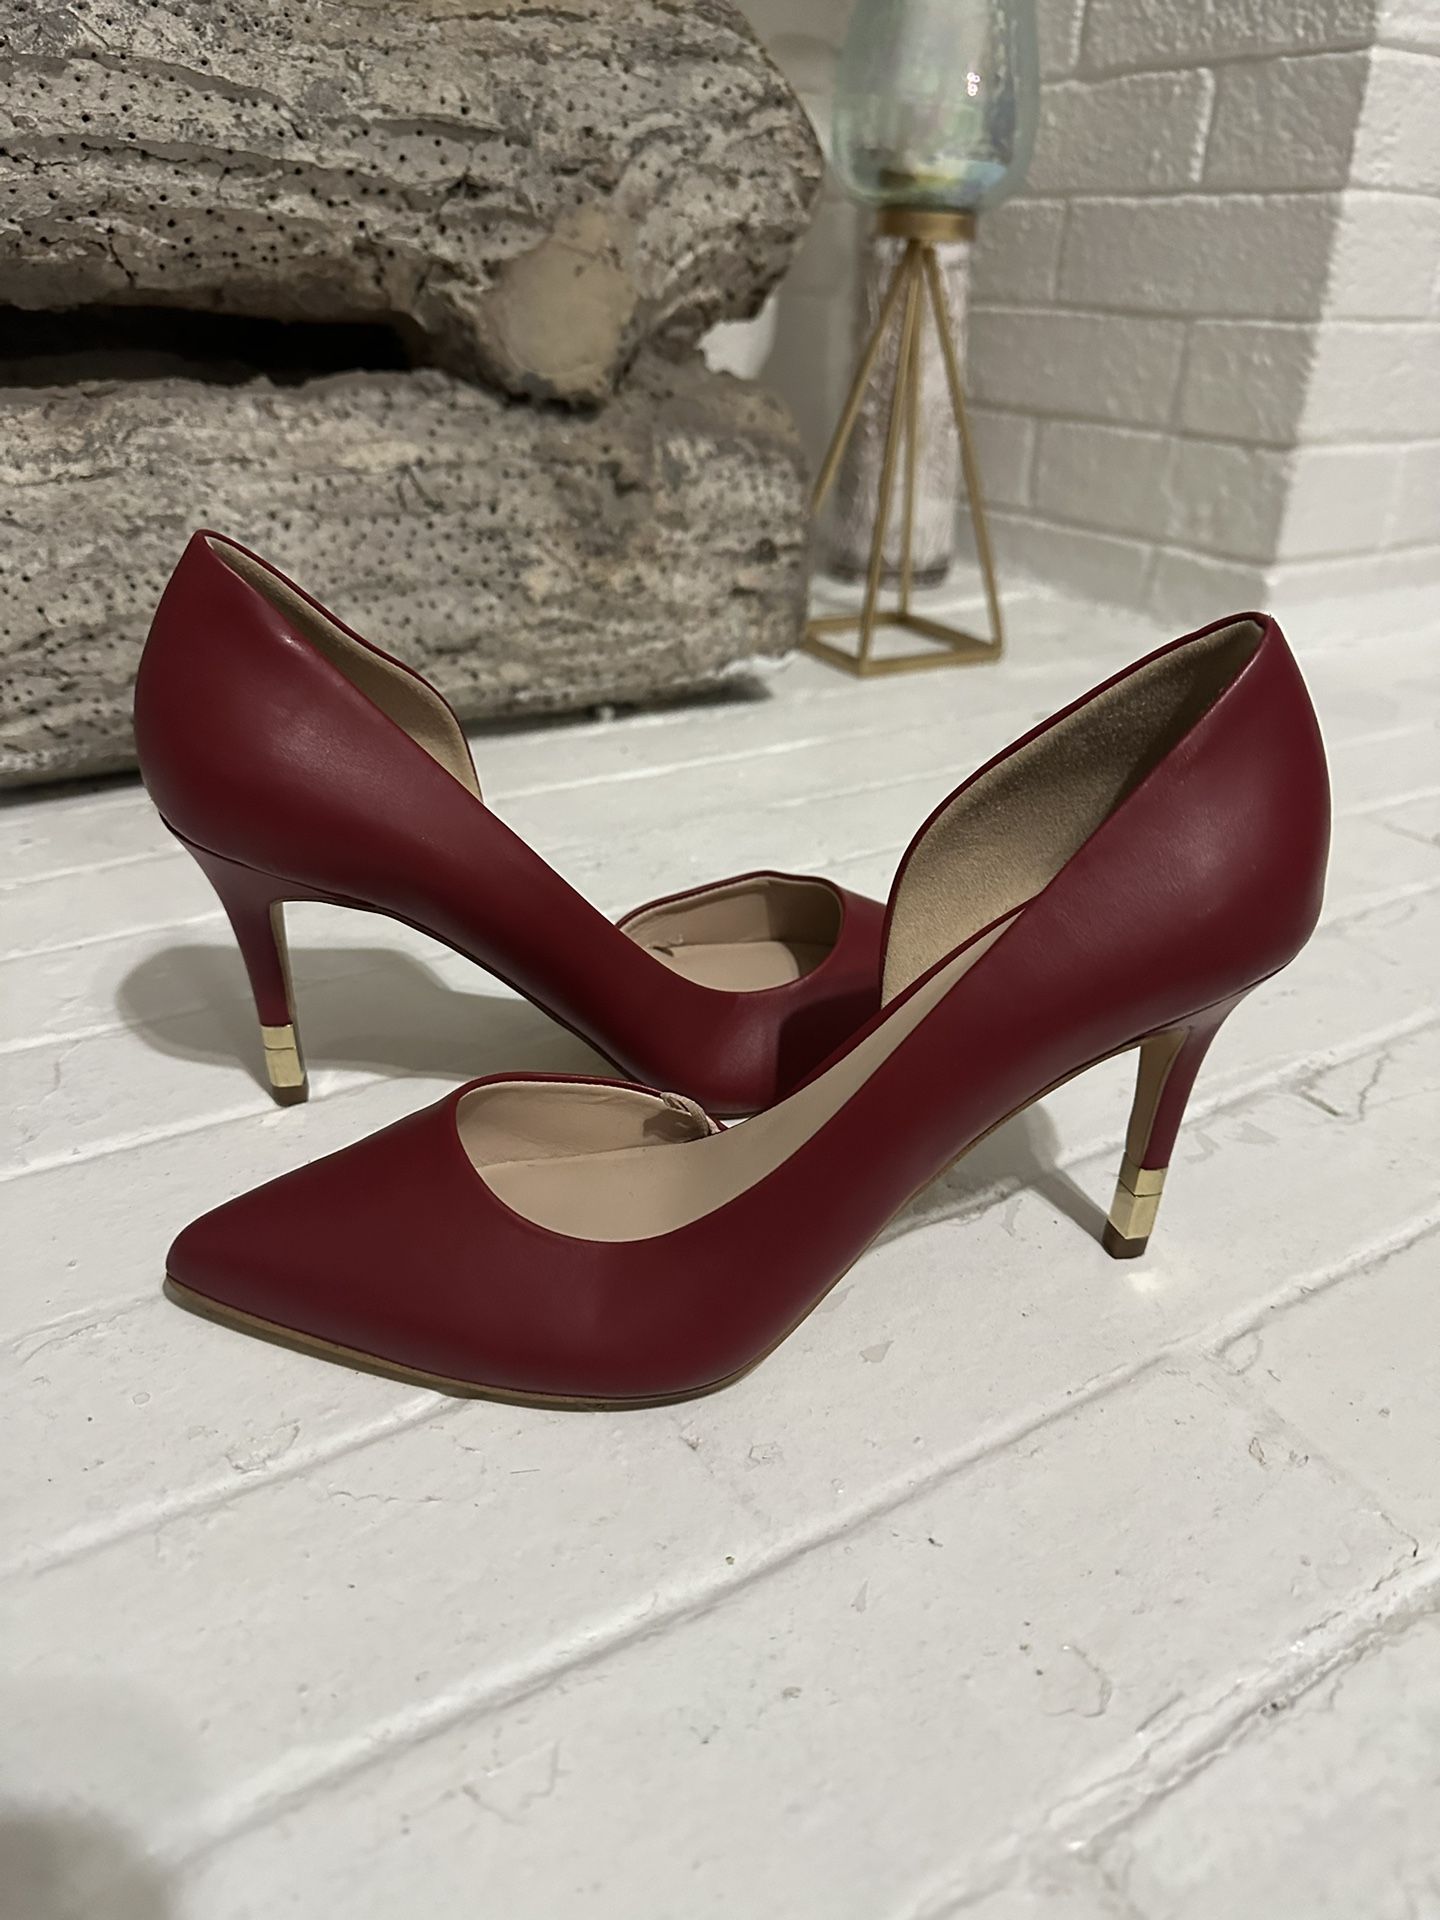 ALDO High Heels Red - Used Once 